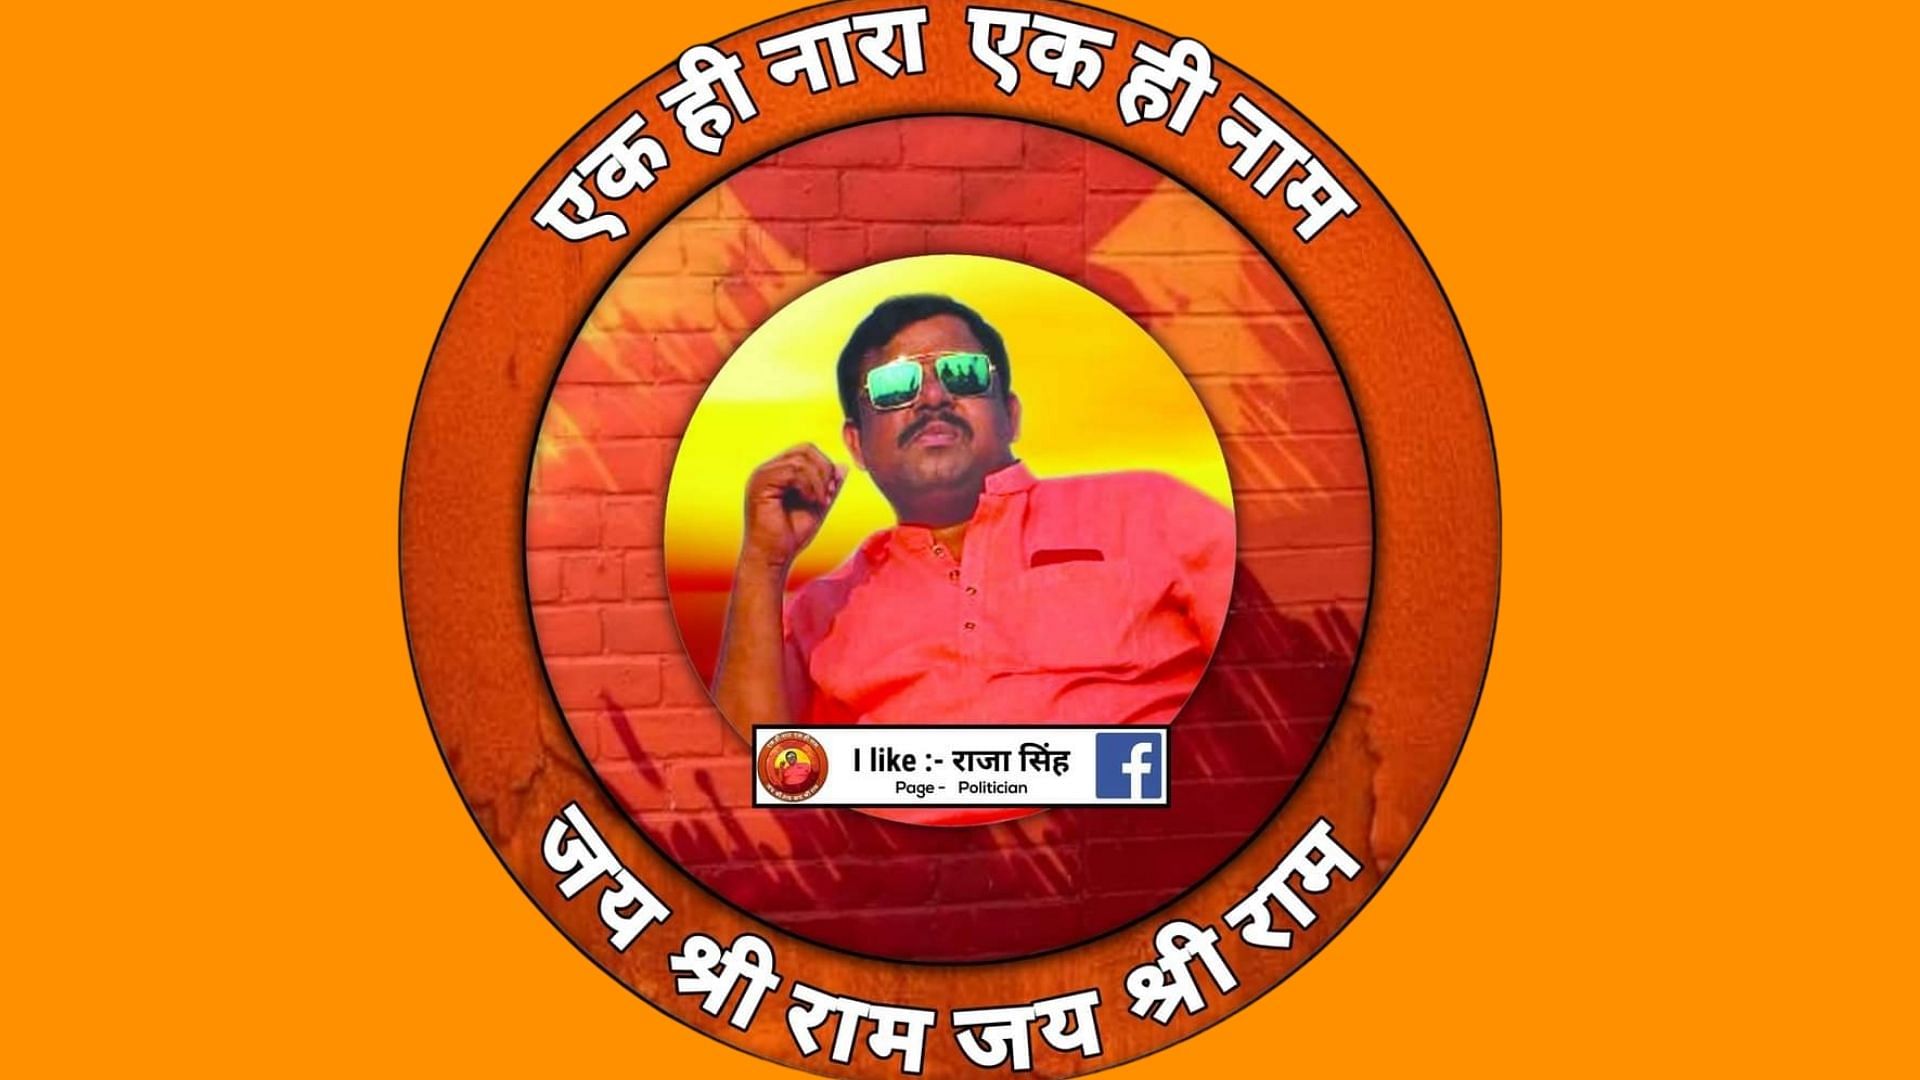 Raja Singh’s fan pages have lakhs of followers.